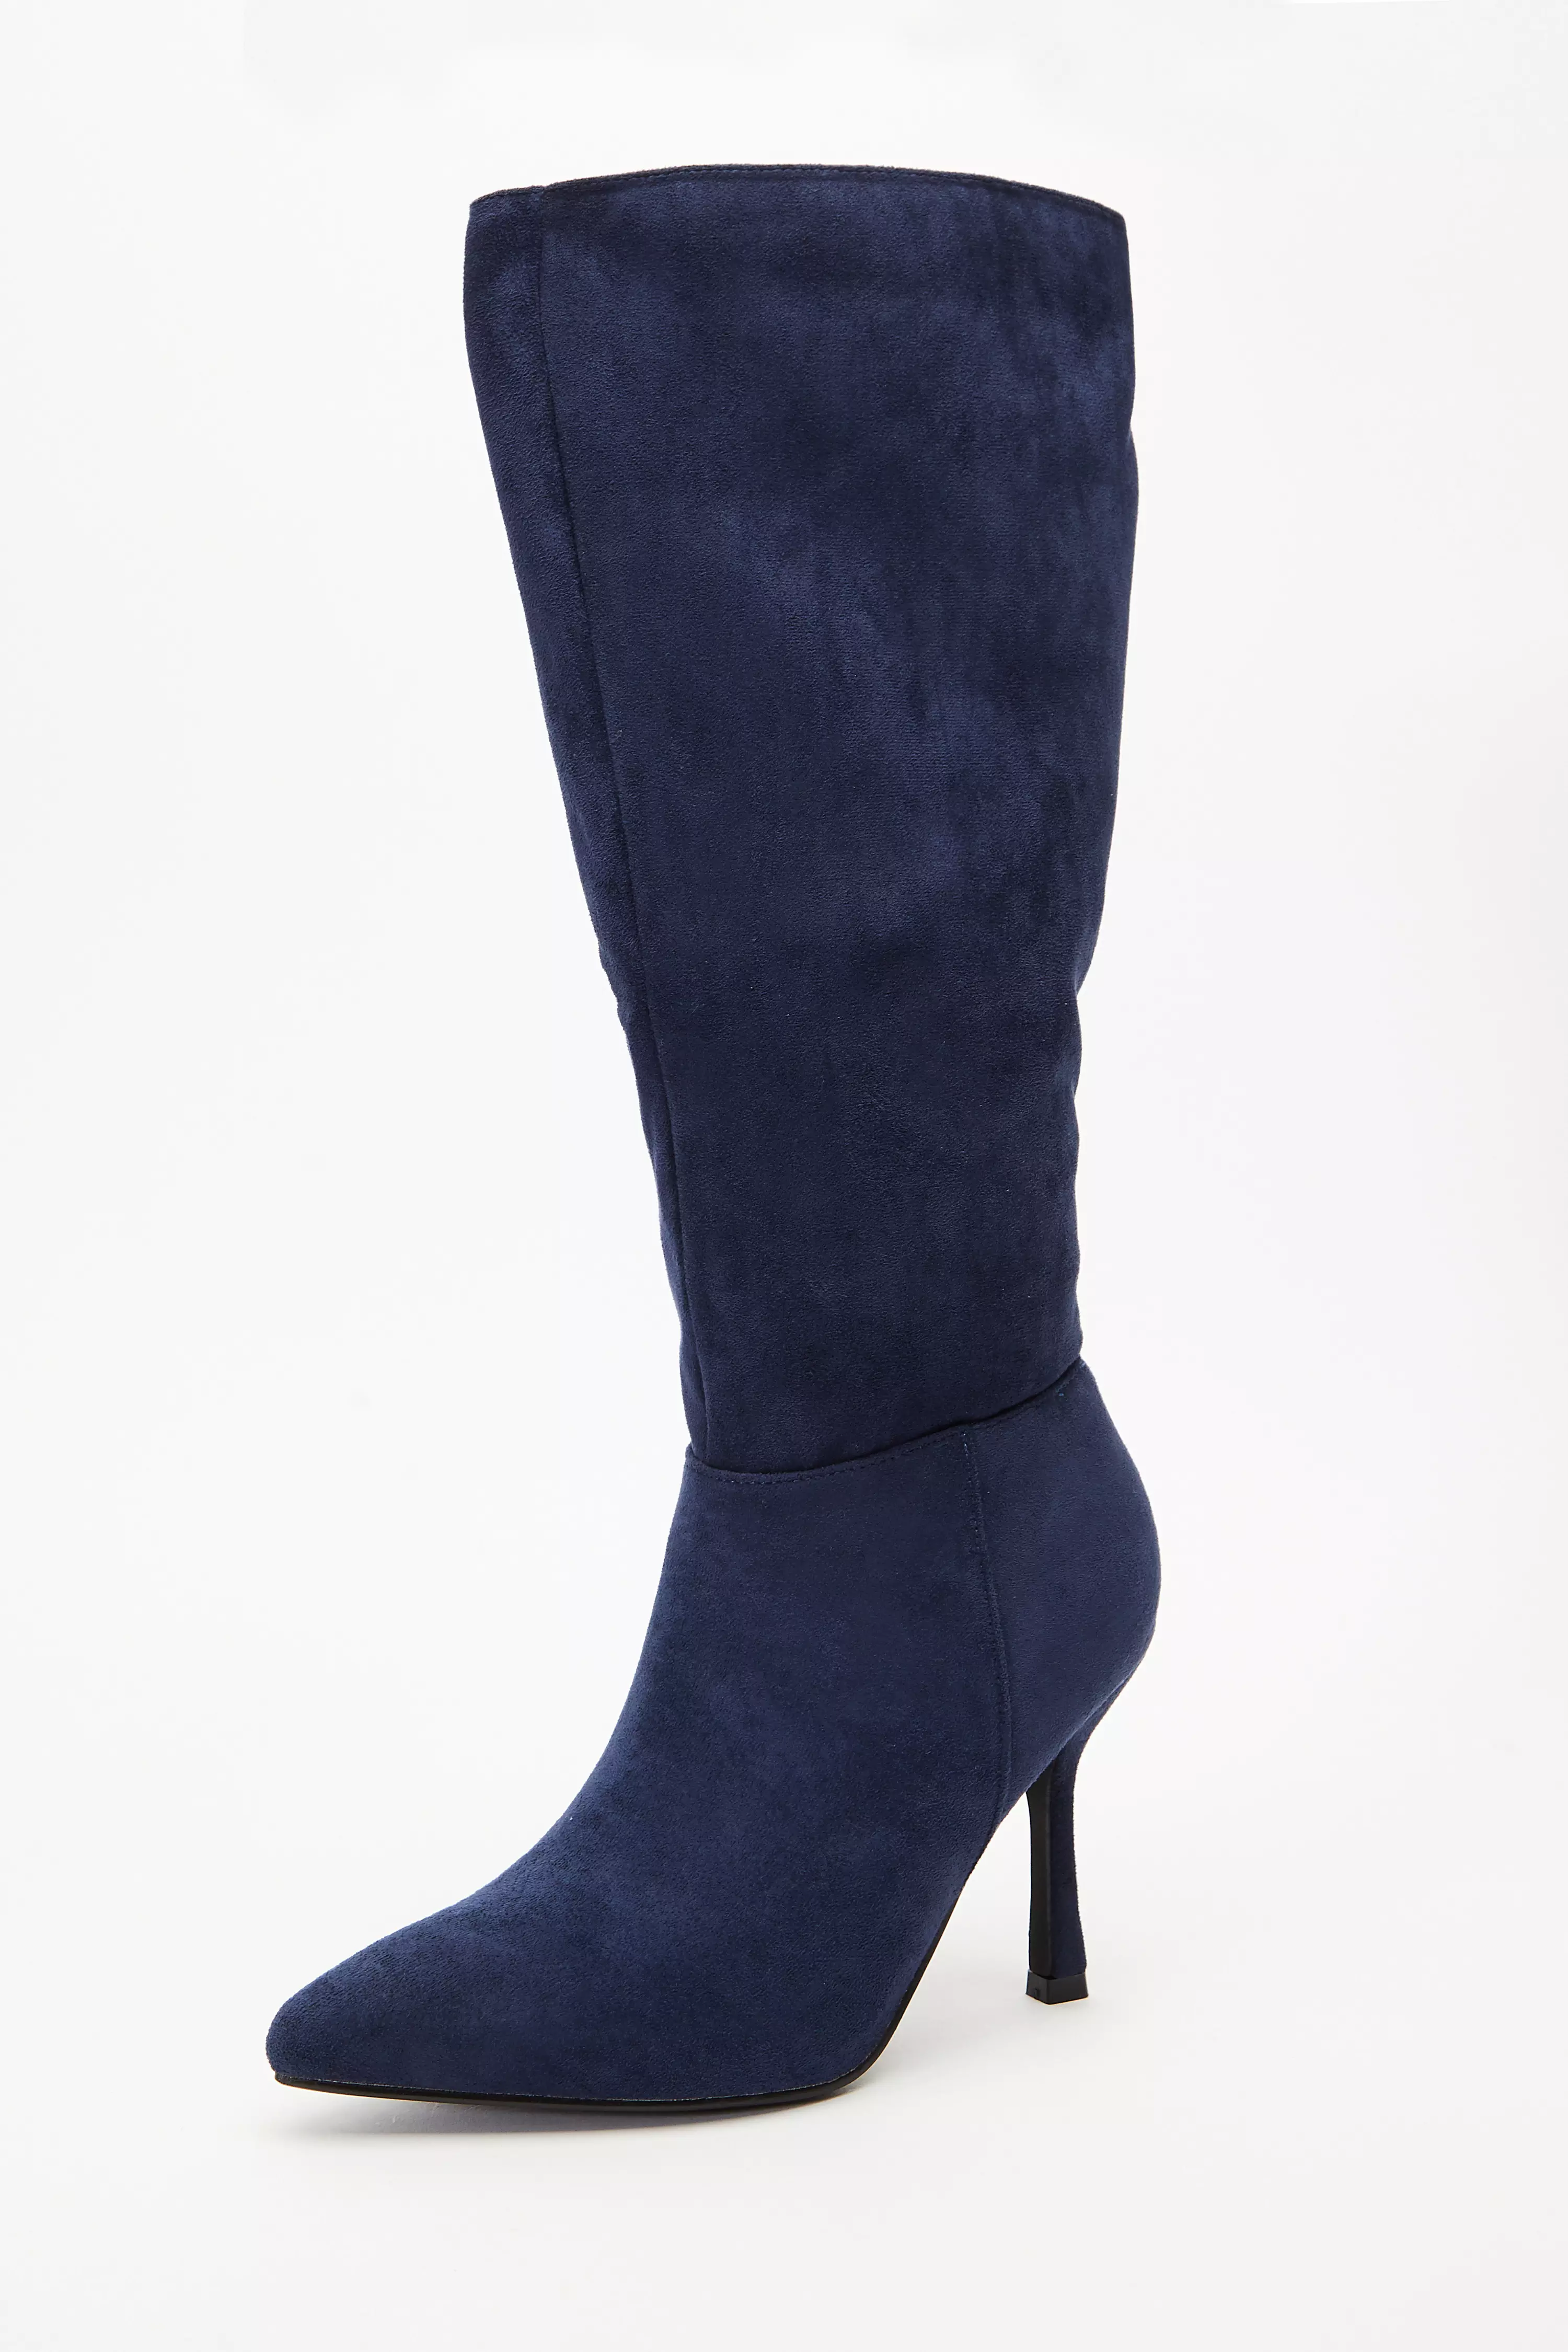 Navy Faux Suede Knee High Heeled Boots